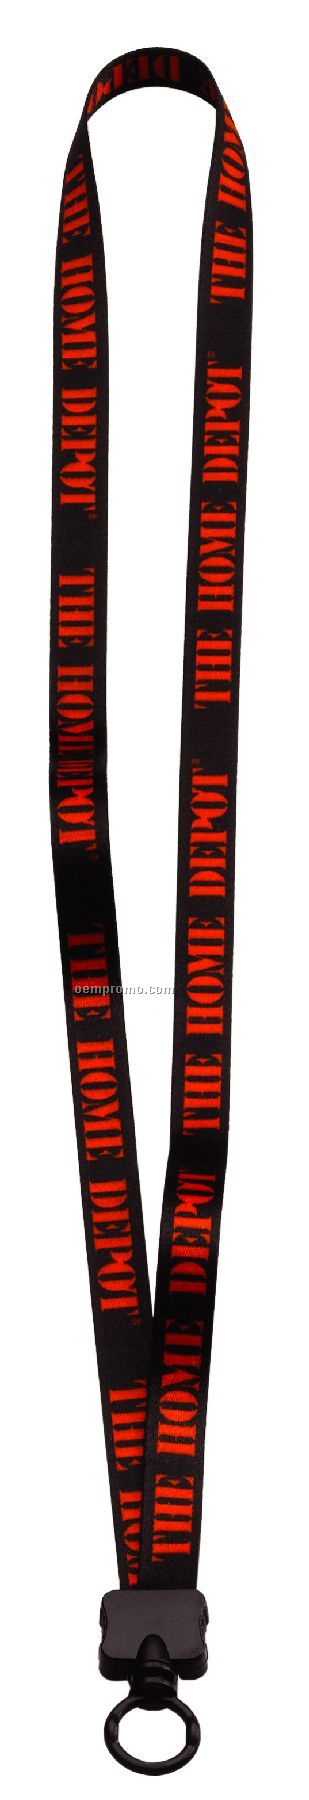 1/2" Dye Sublimated Lanyard With Plastic Clamshell & O-ring